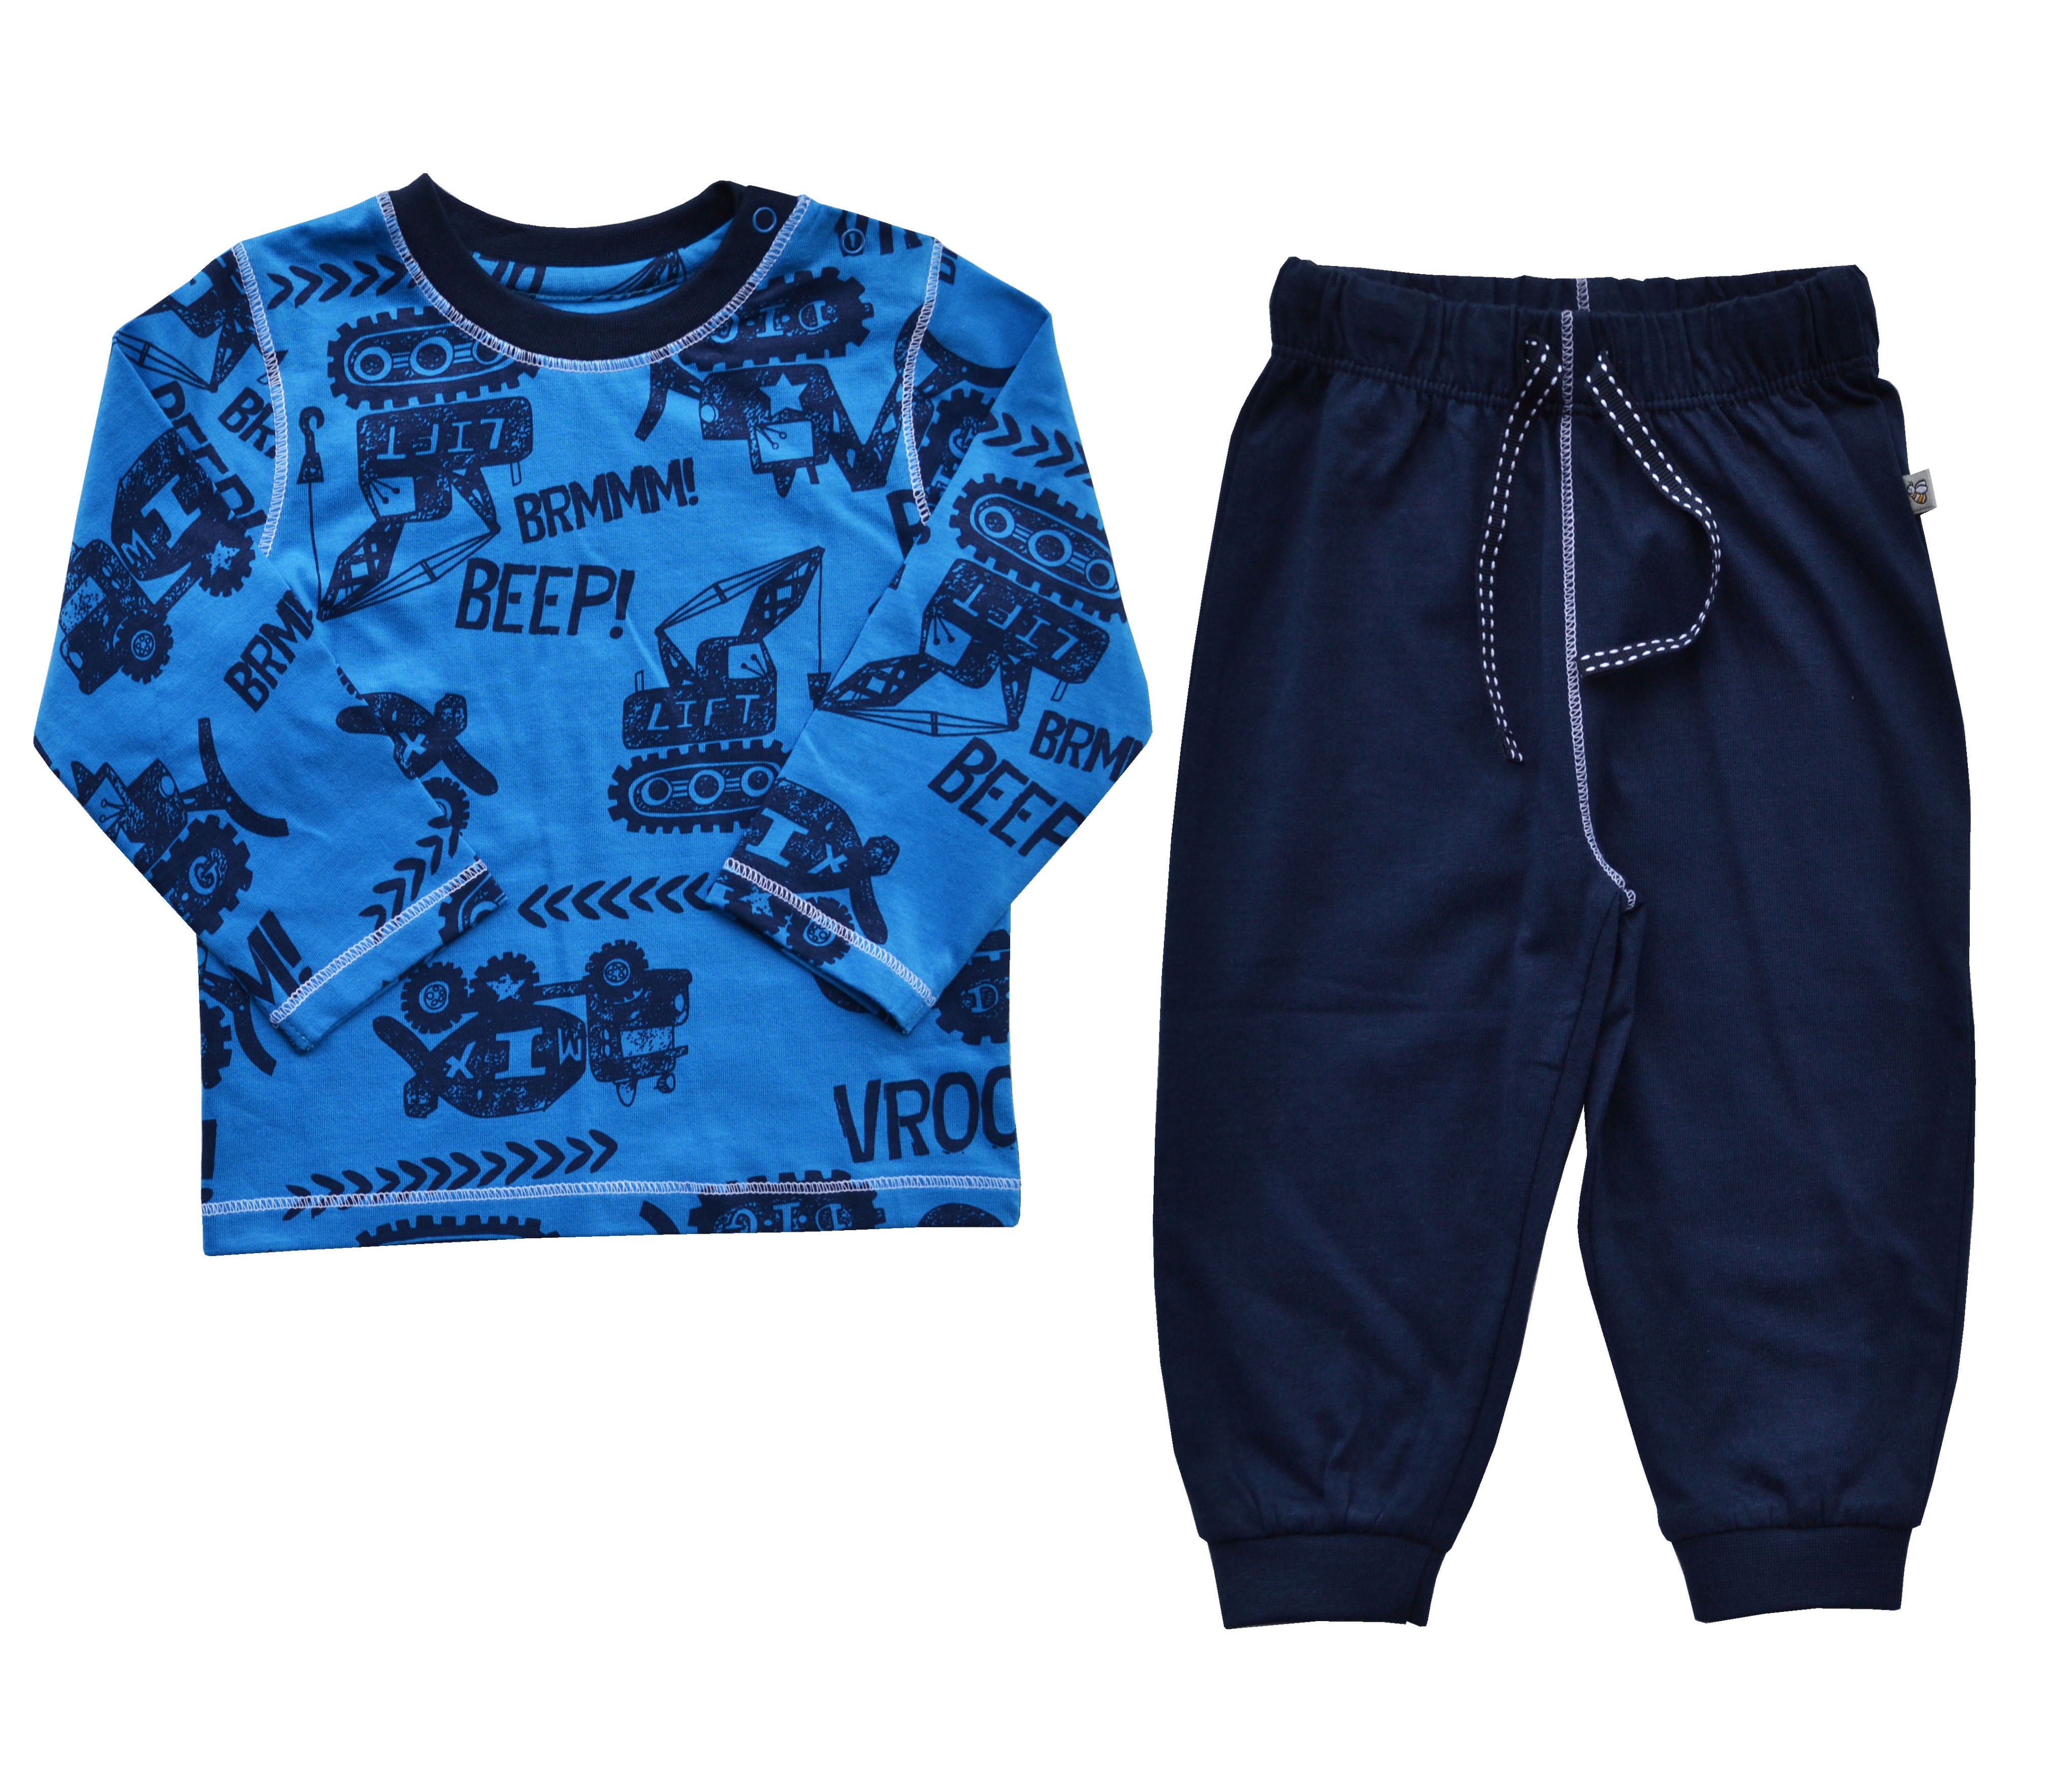 Babeez | Blue Allover Car Printed T-Shirt + Navy Long Pant Set (100% Cotton Jersey) undefined